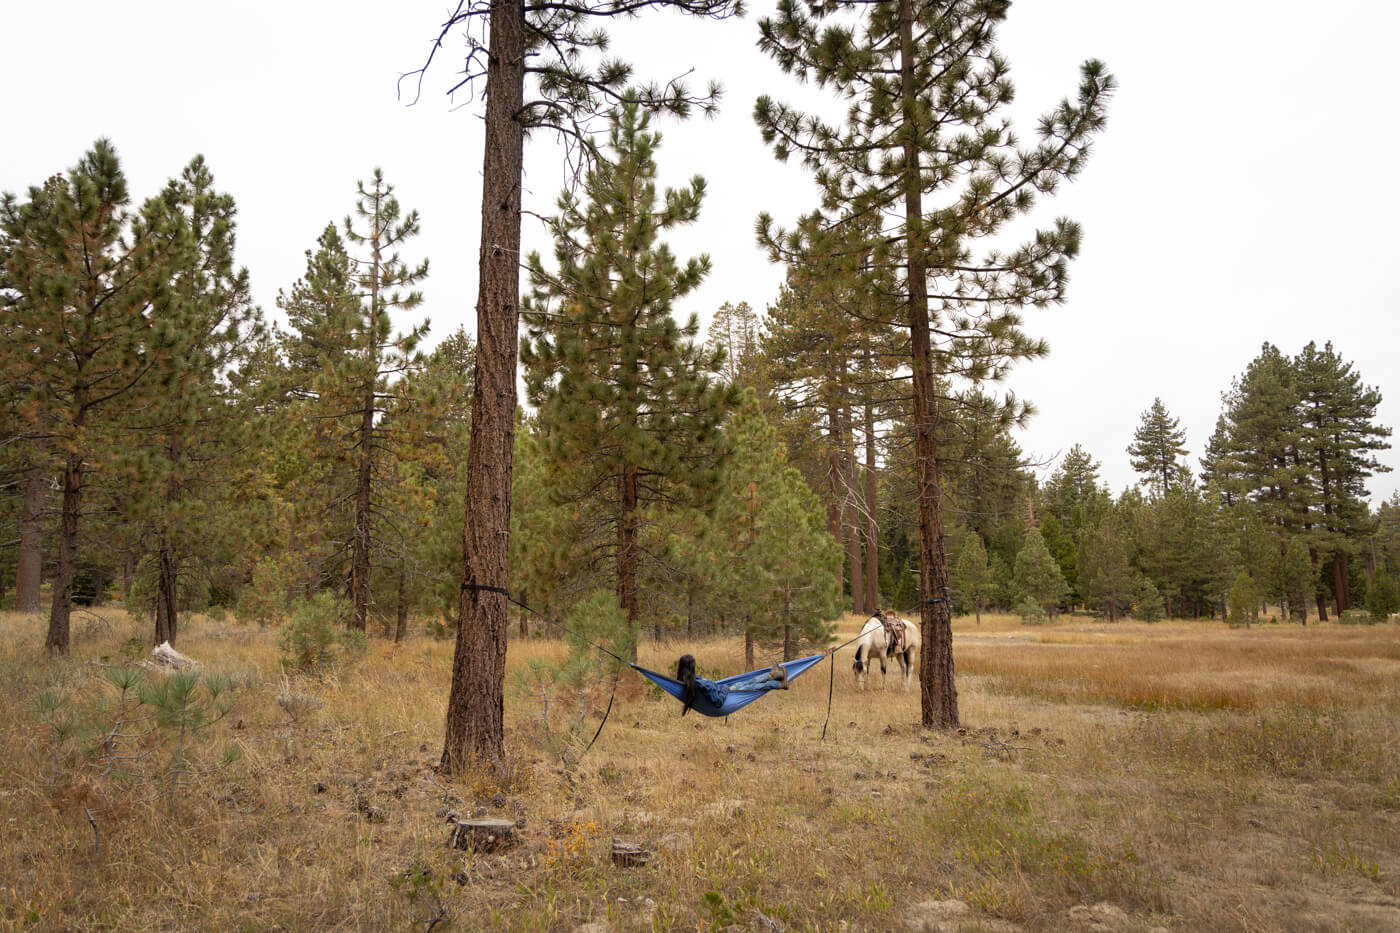 A woman lays in her ENO DoubleNest hammock between two trees while her horse grazes in the distance